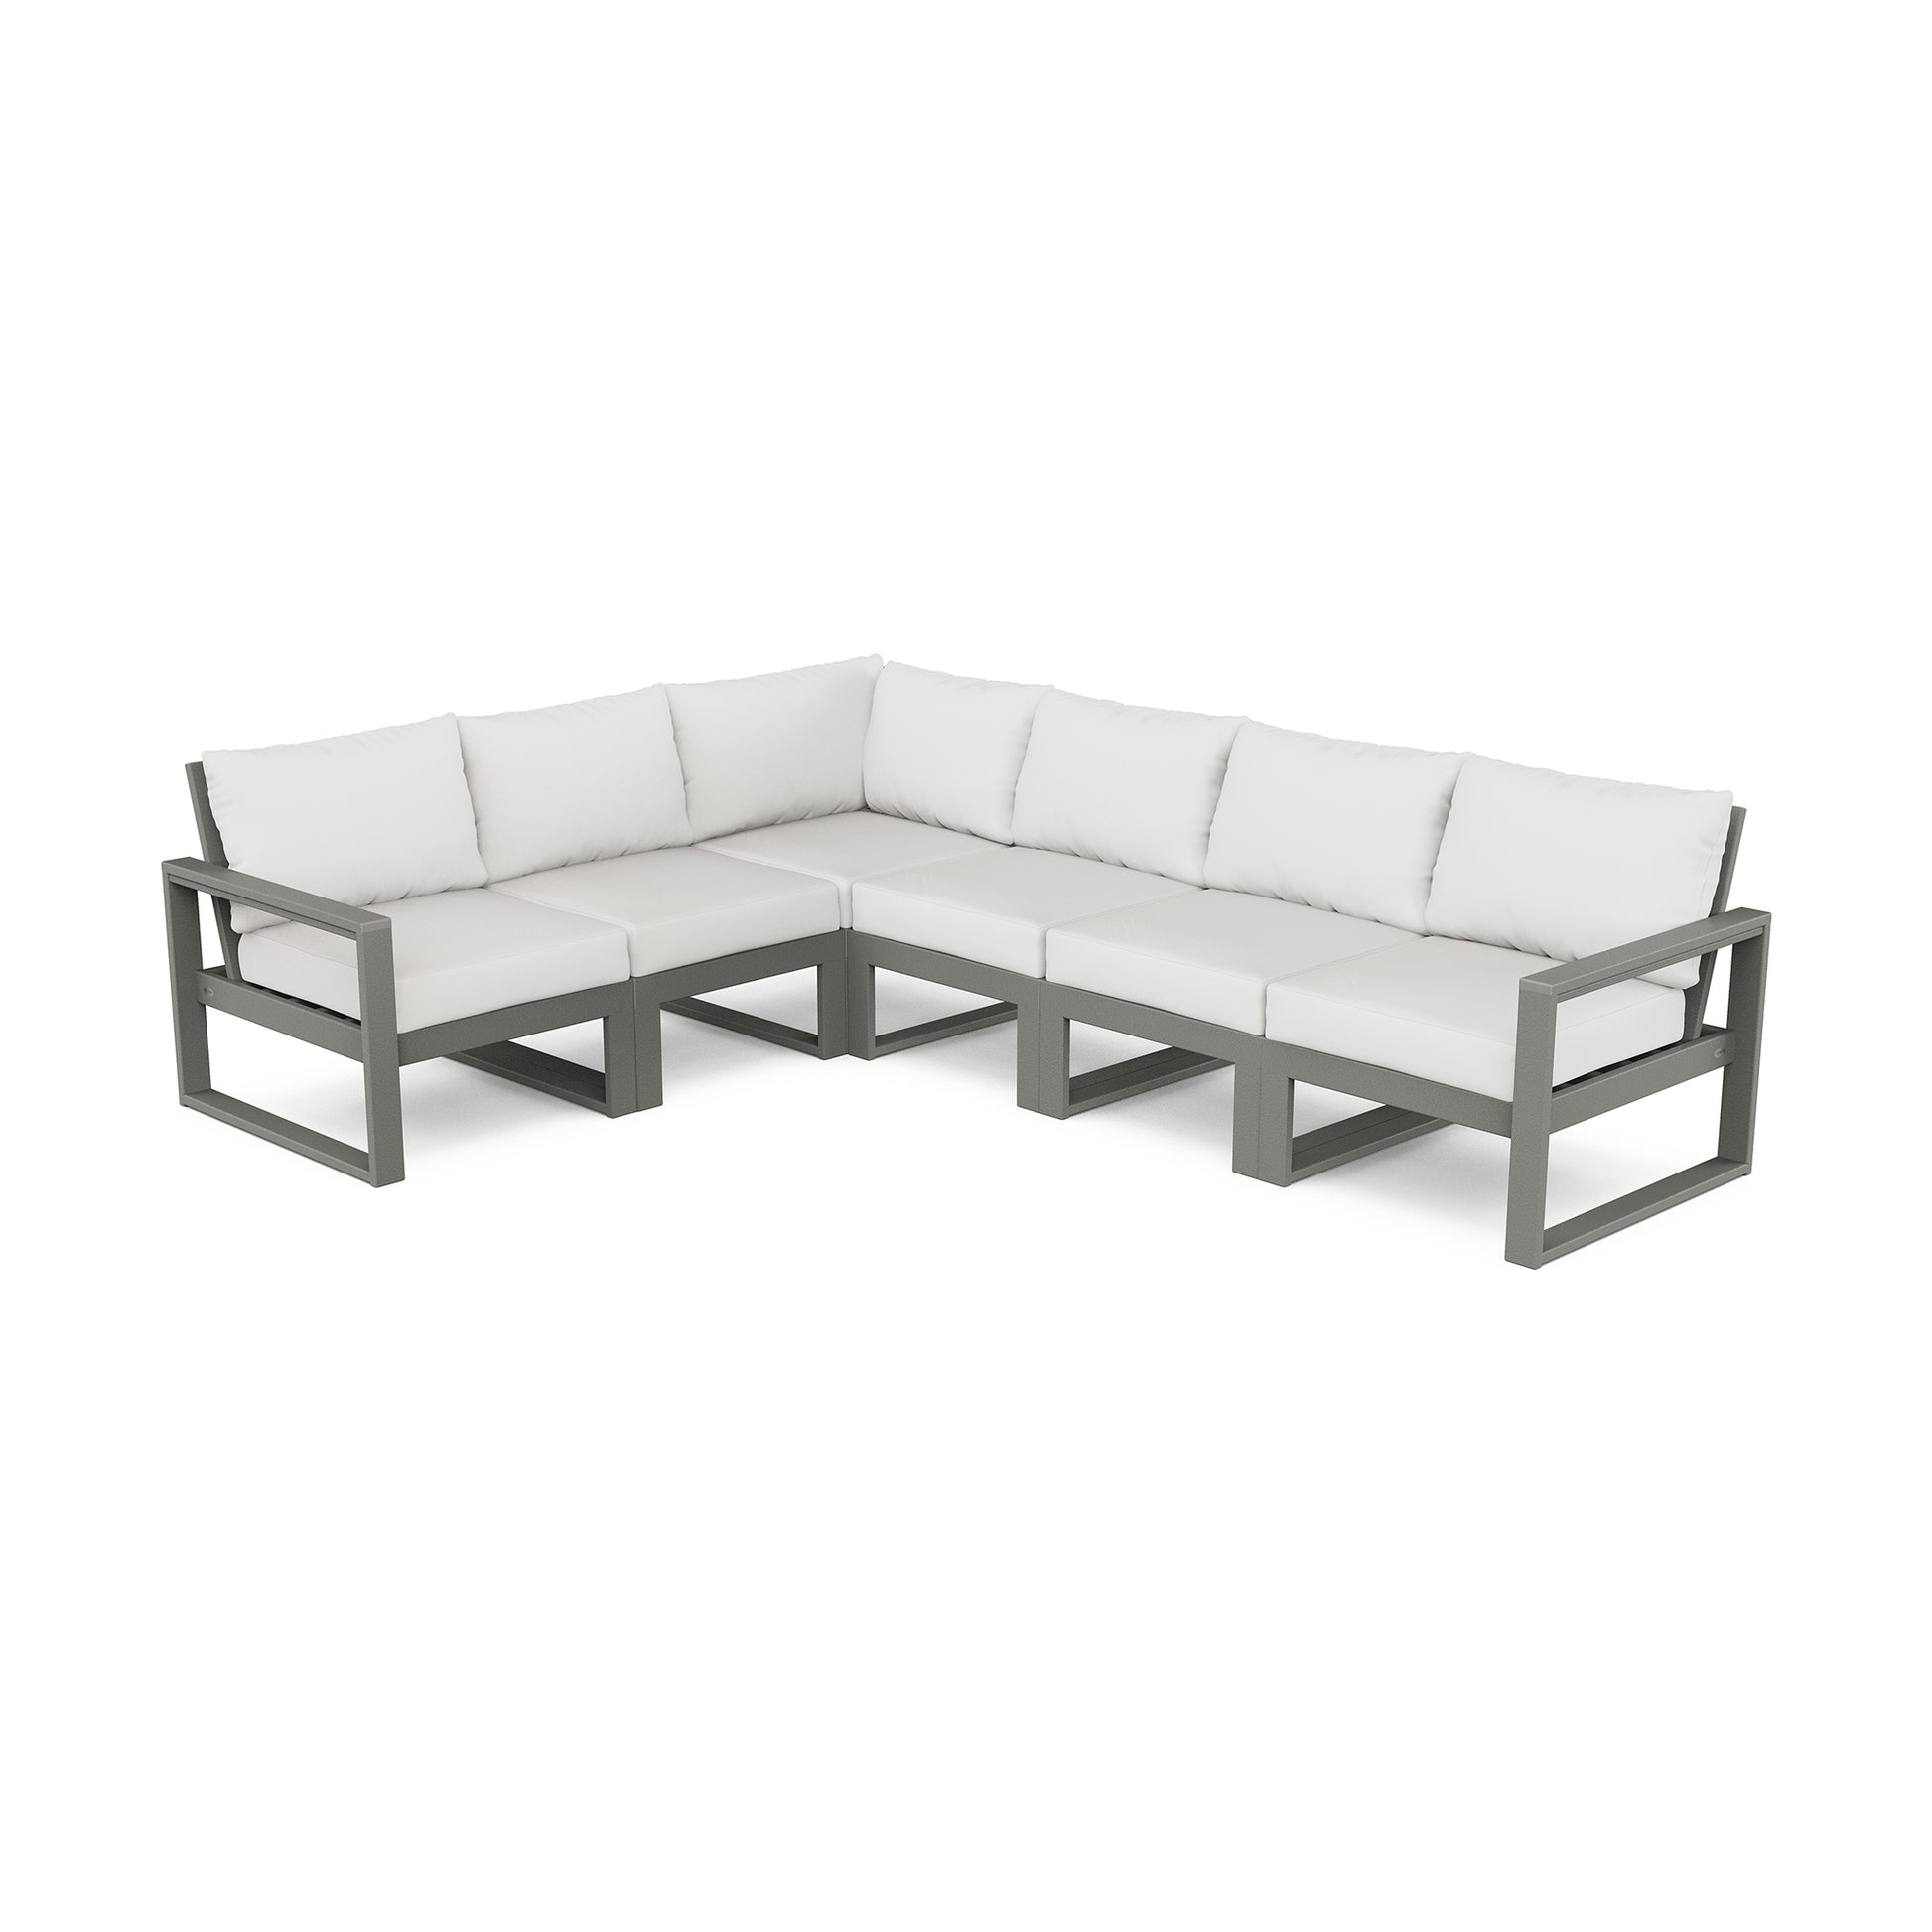 A modern l-shaped POLYWOOD EDGE 6-Piece Modular Deep Seating Set with a gray metal frame and white cushions, isolated on a white background.